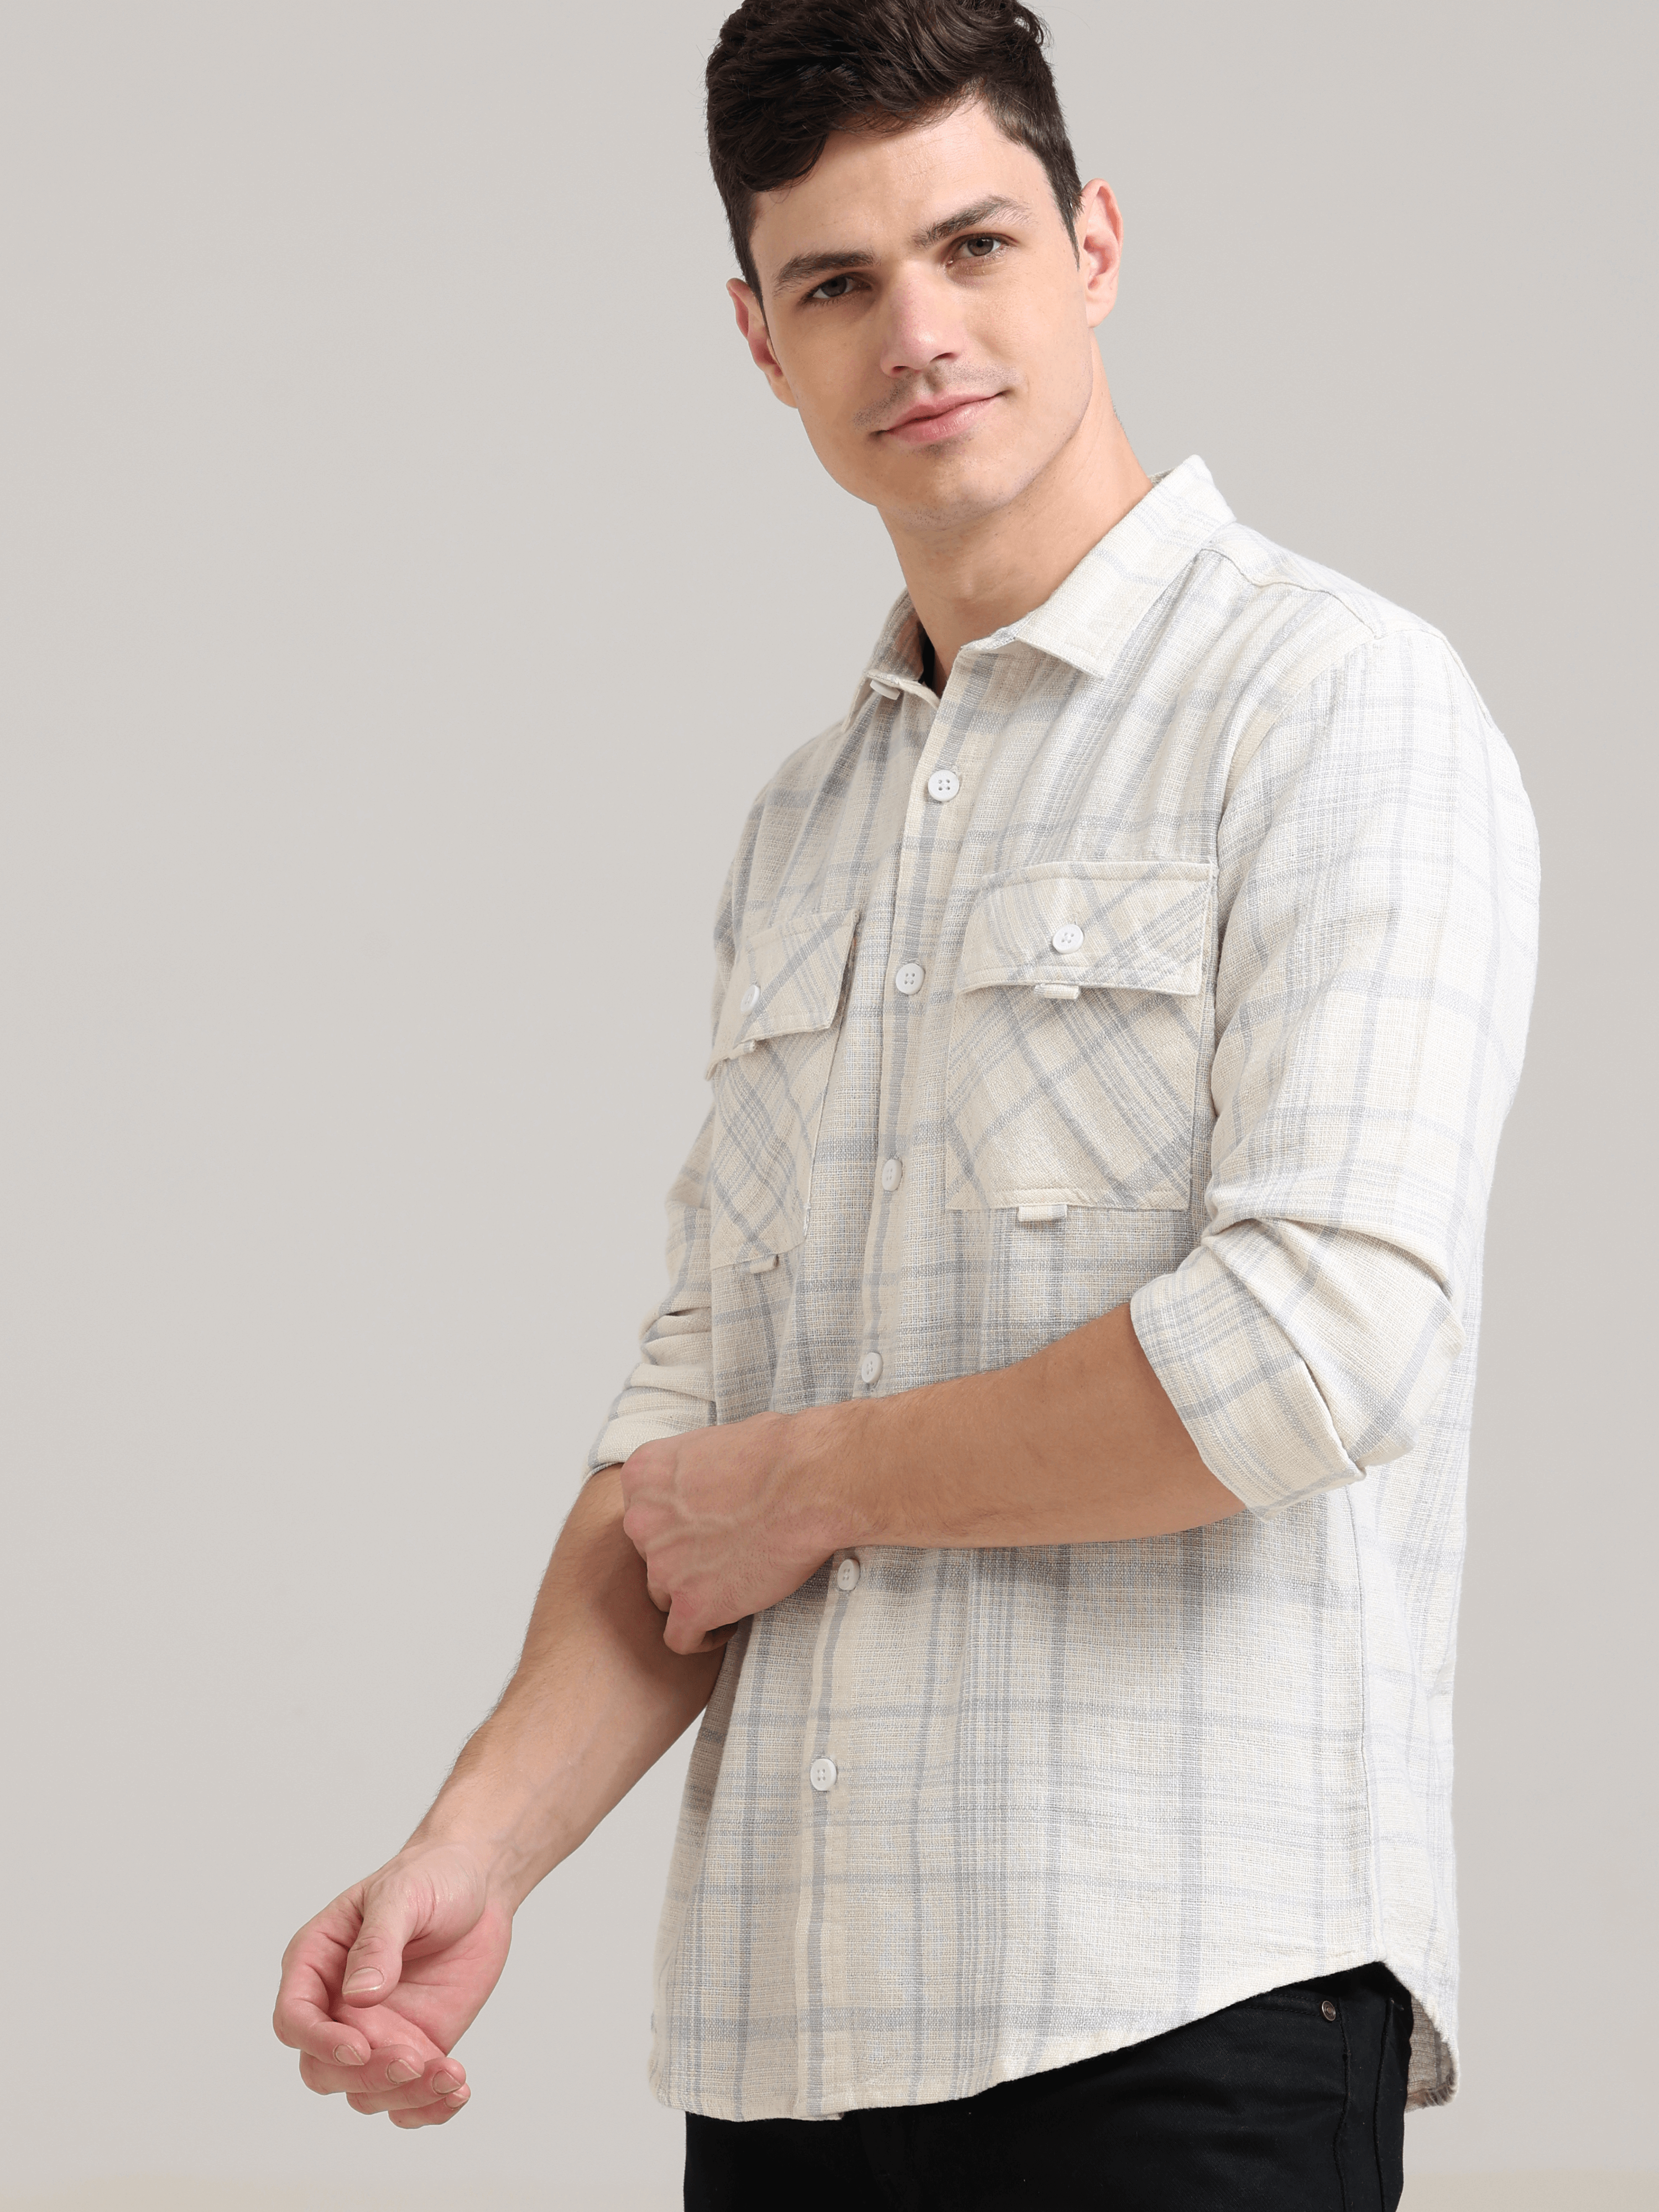 Pure Cotton white Spread Collar Check Shirt shop online at Estilocus. 100% Cotton • Full-sleeve check shirt• Cut and sew placket• Regular collar• Double button edge cuff• Double pocket with flap• Curved bottom hemline .• All double needle construction, fi